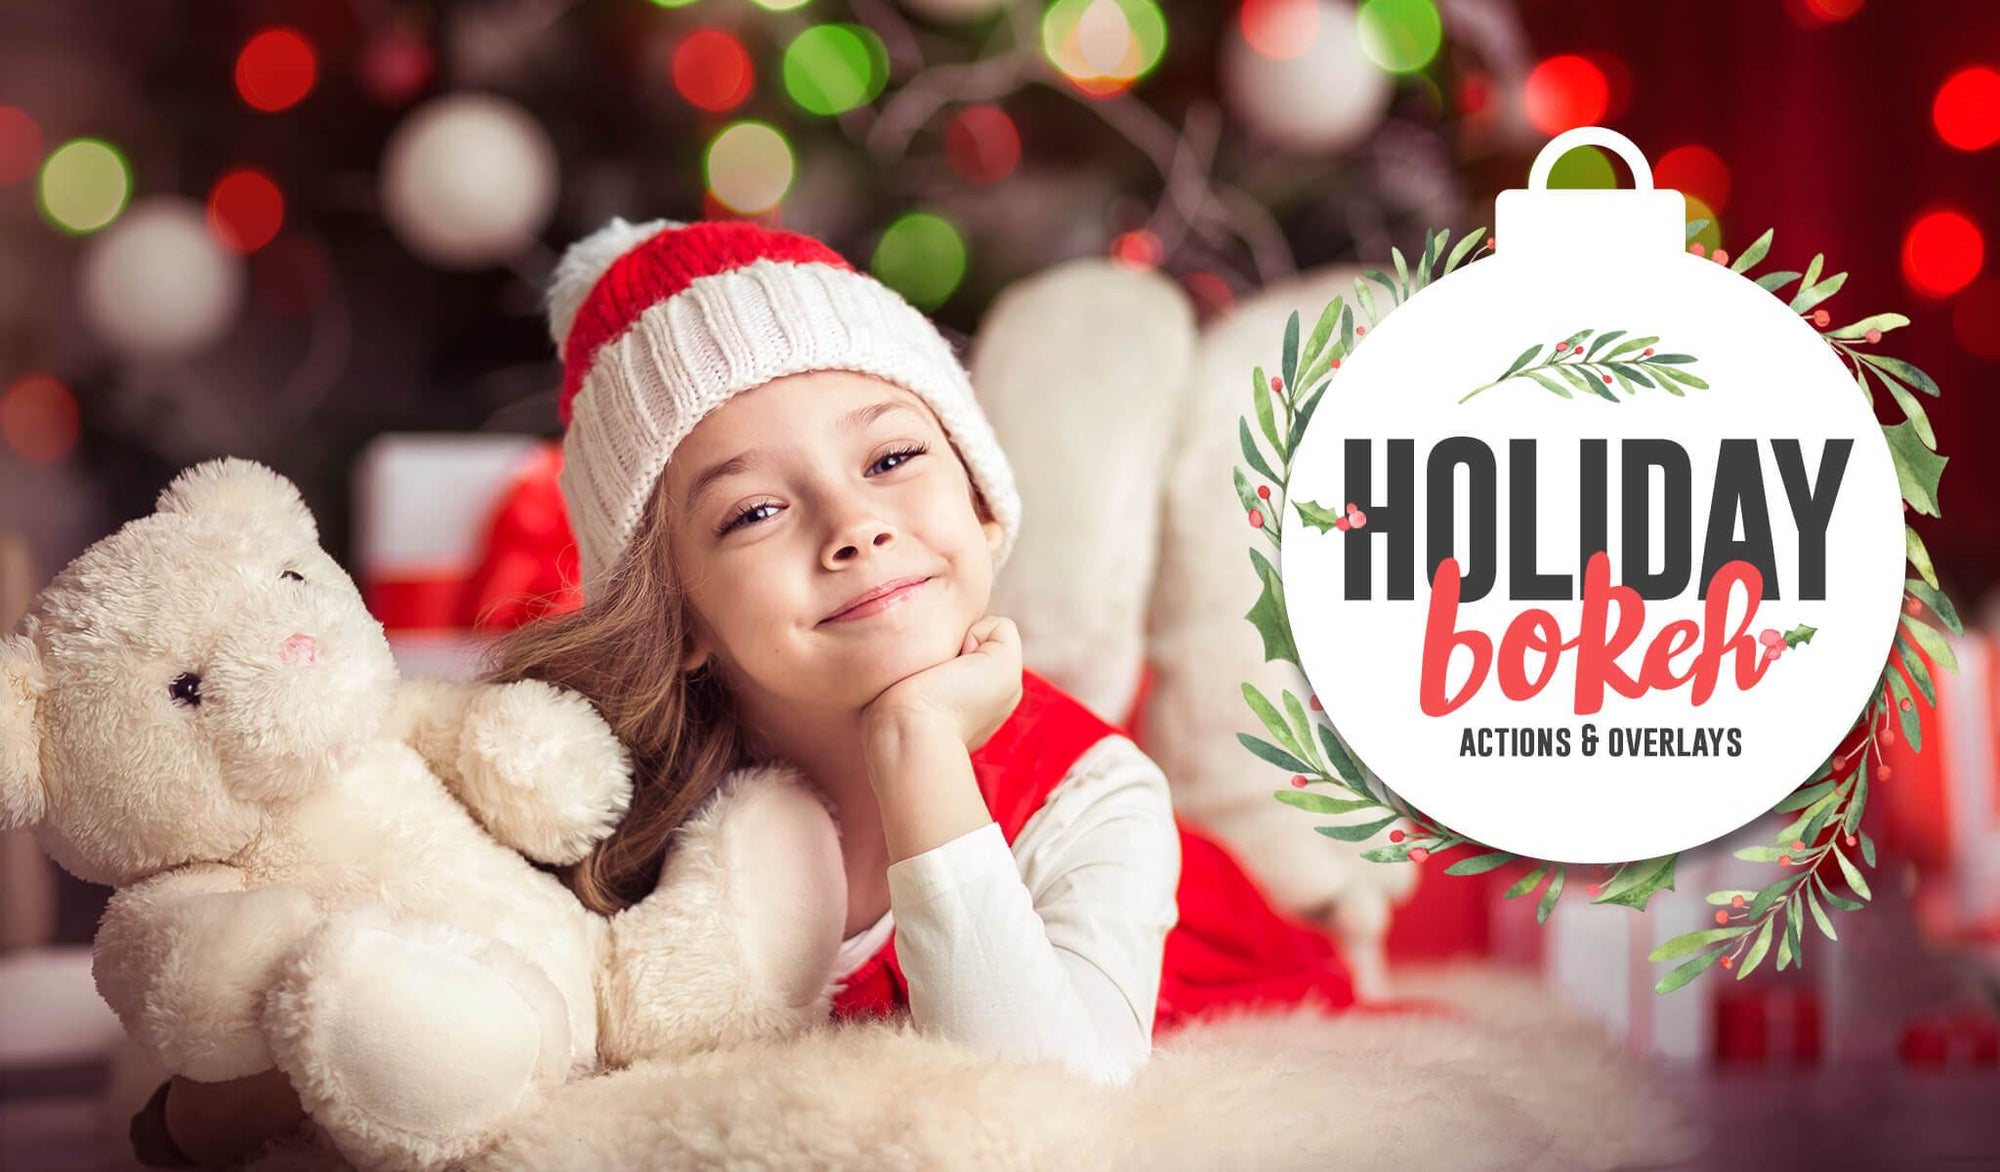 Holiday Bokeh Overlays & Actions Collection for Photoshop